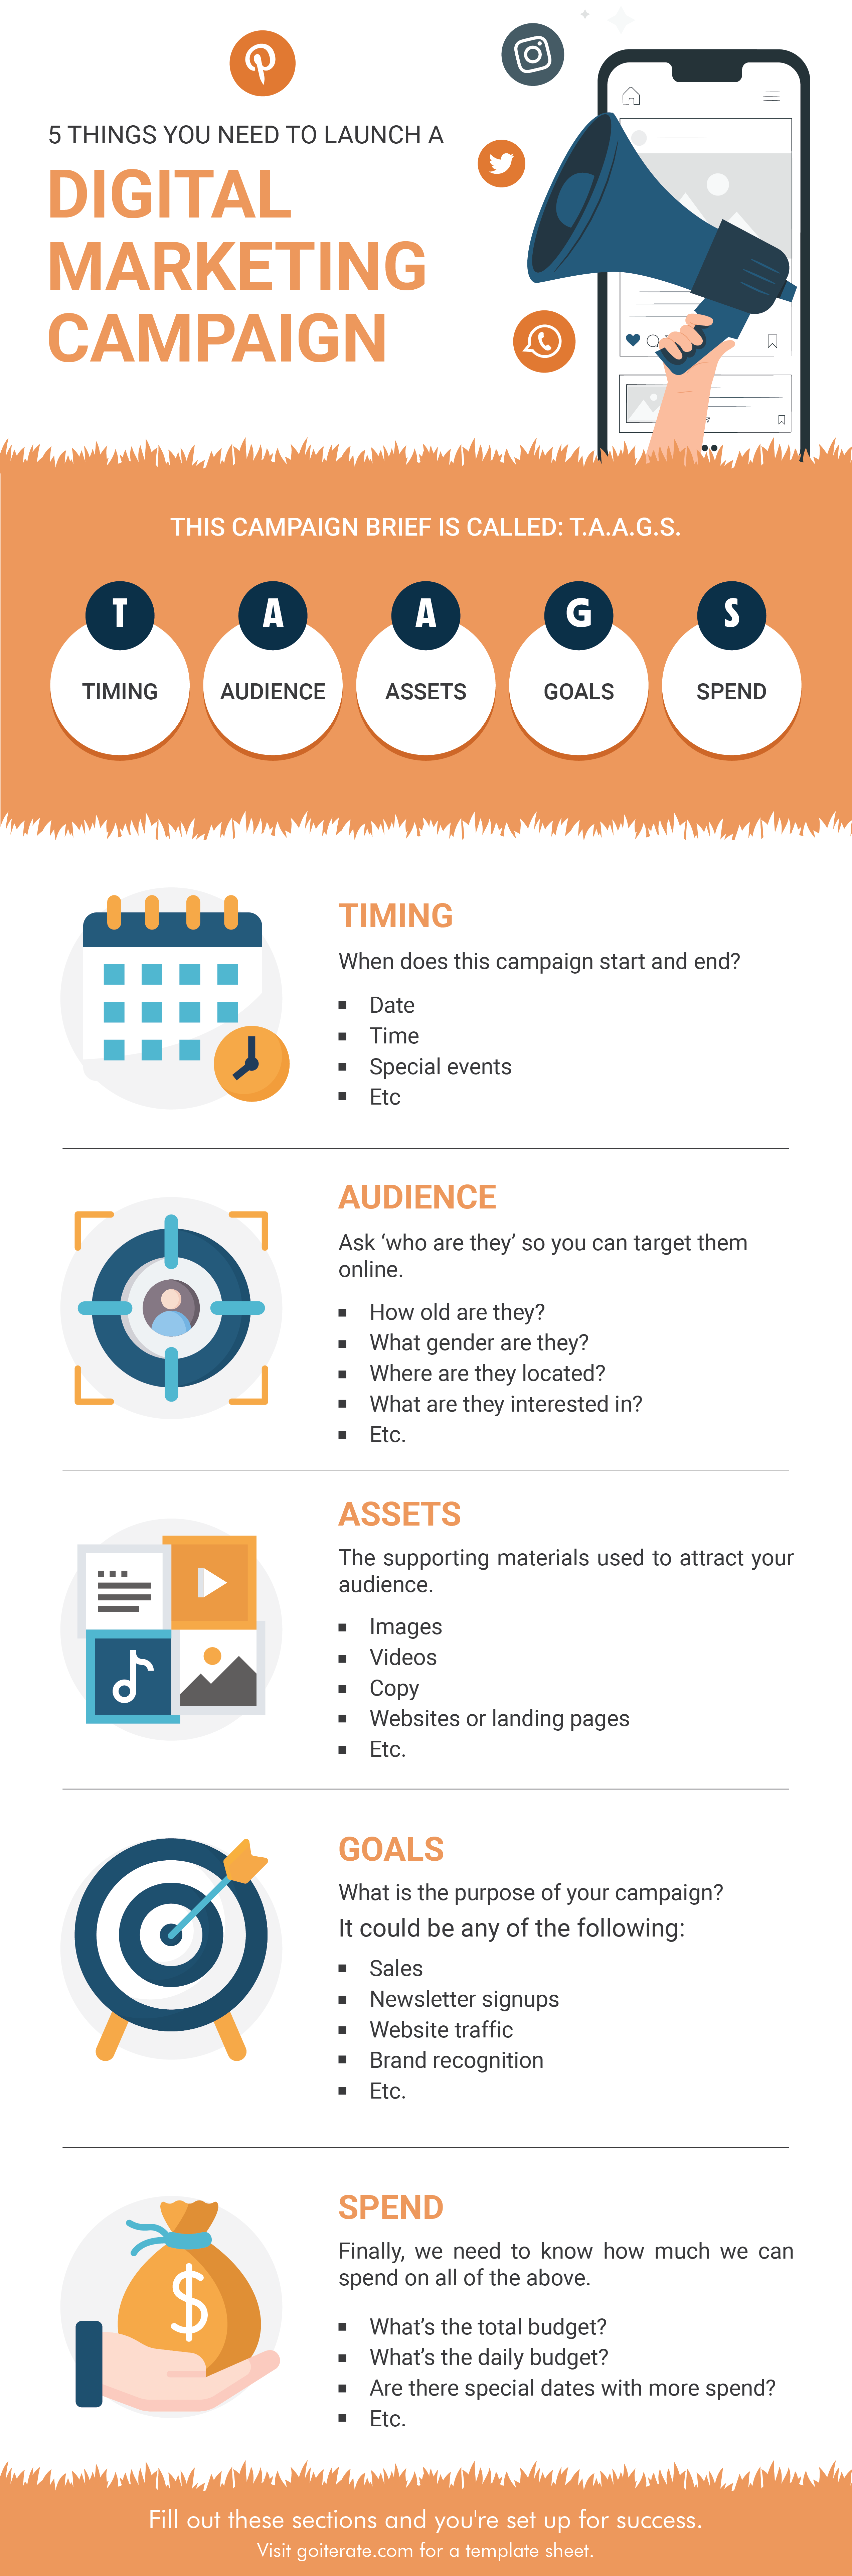 TAAGS Digital Marketing Campaign Infographic